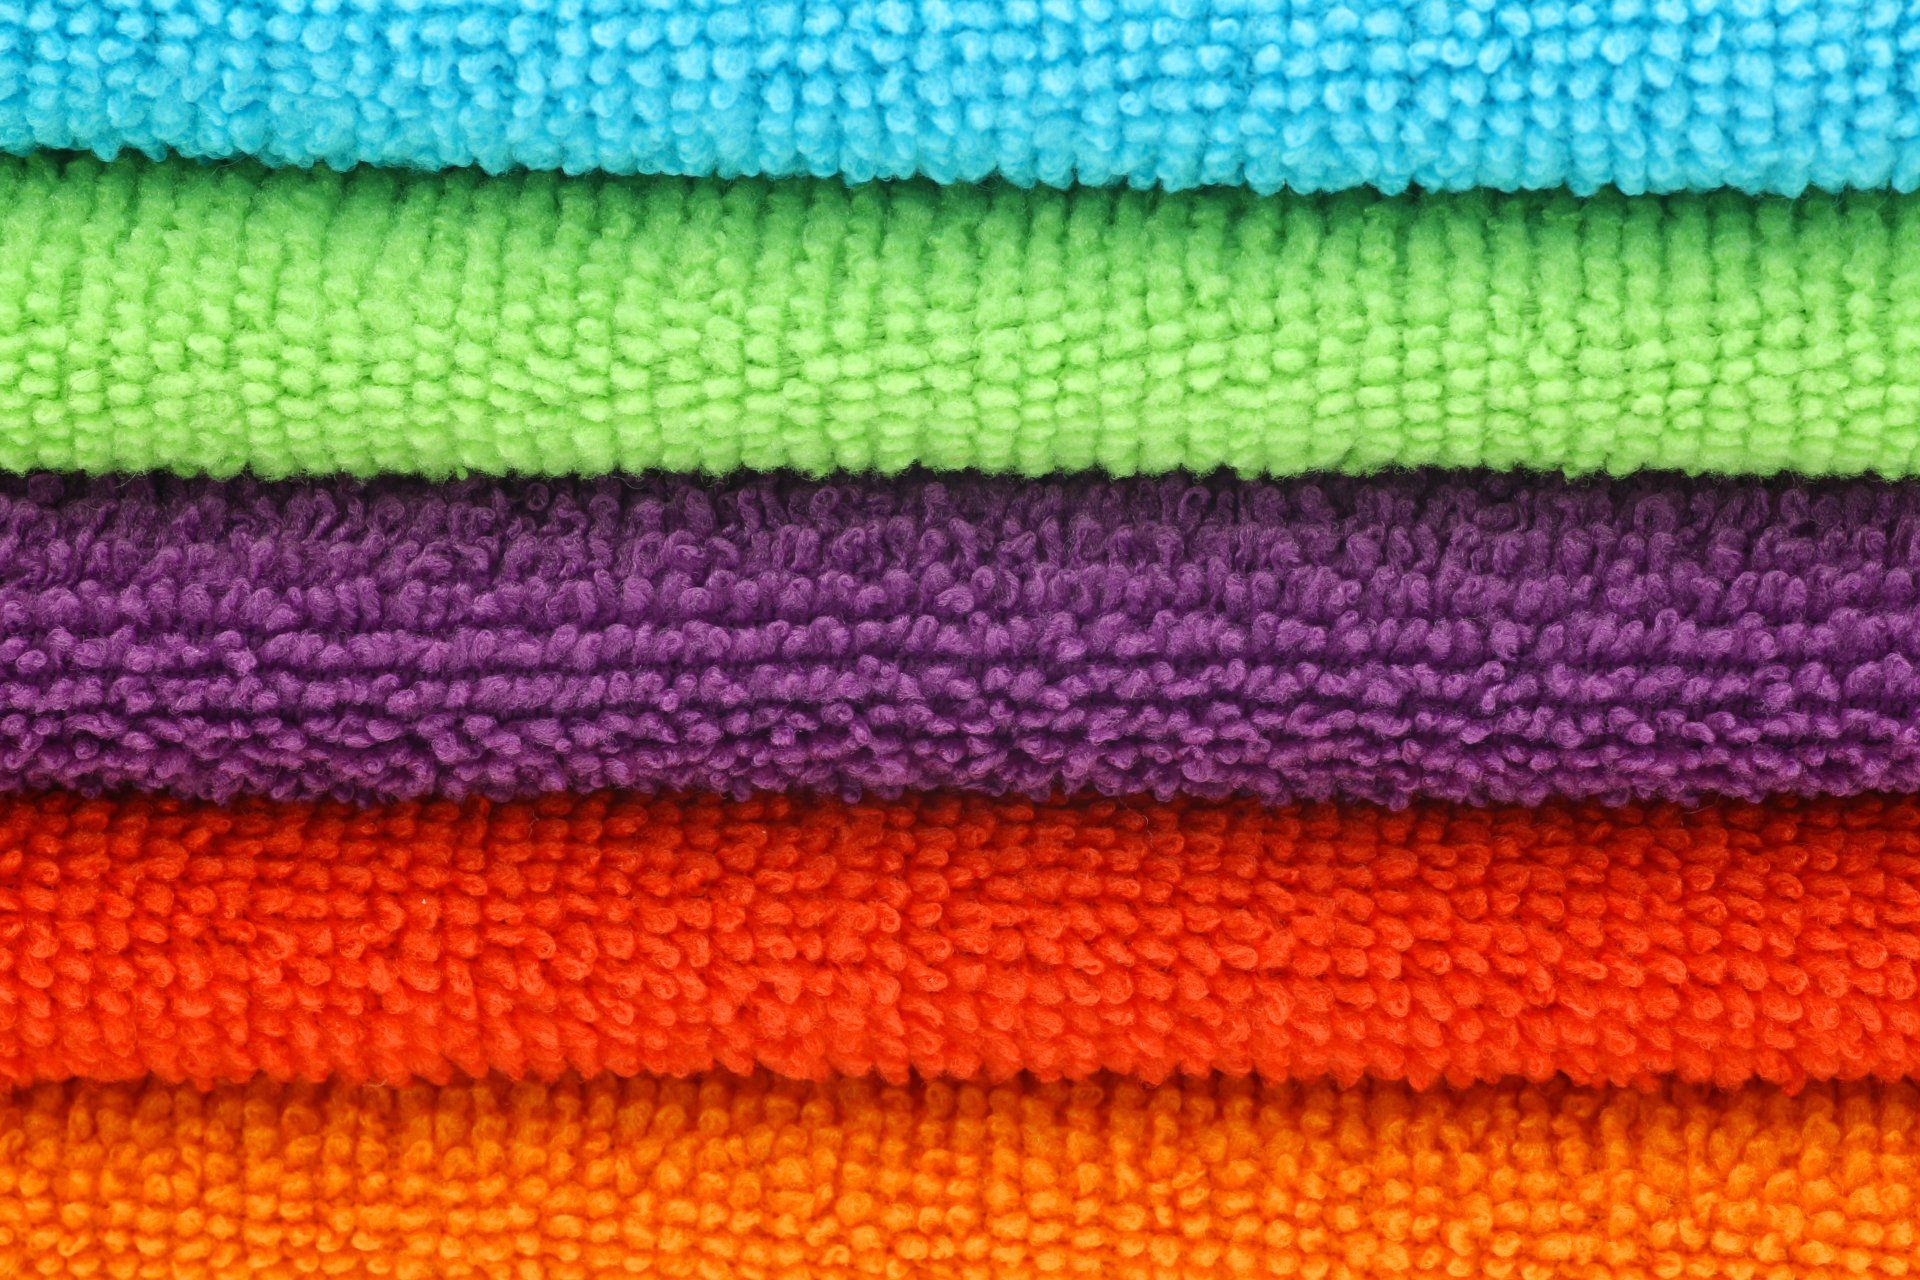 Microfibre cleaning cloths